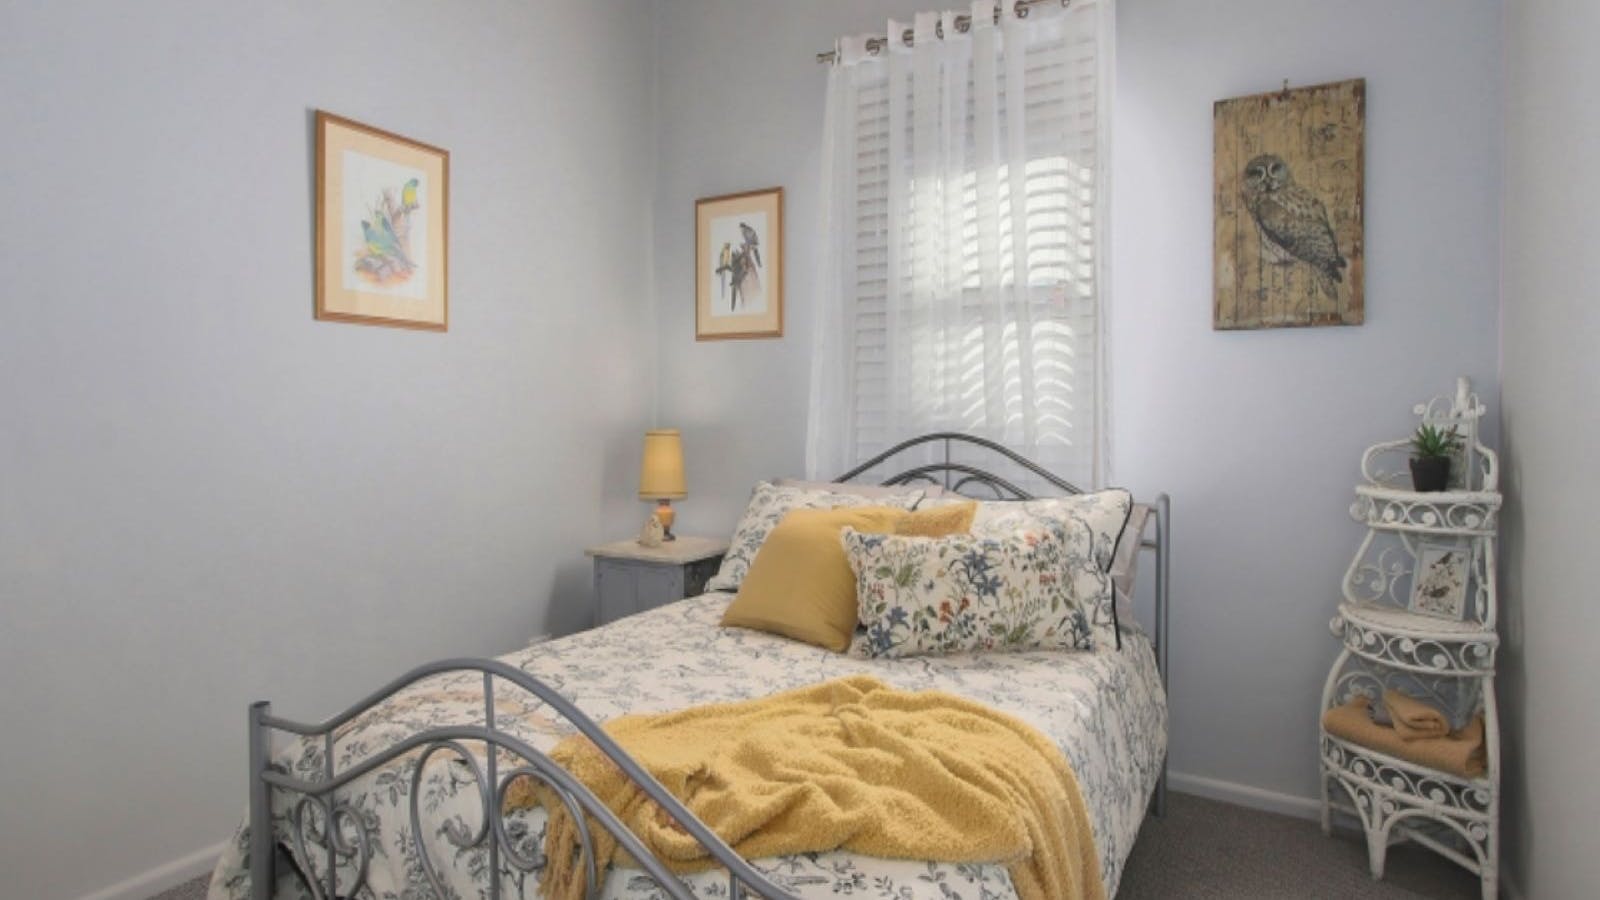 Bedroom, double bed in front of a window with white and yellow linin.